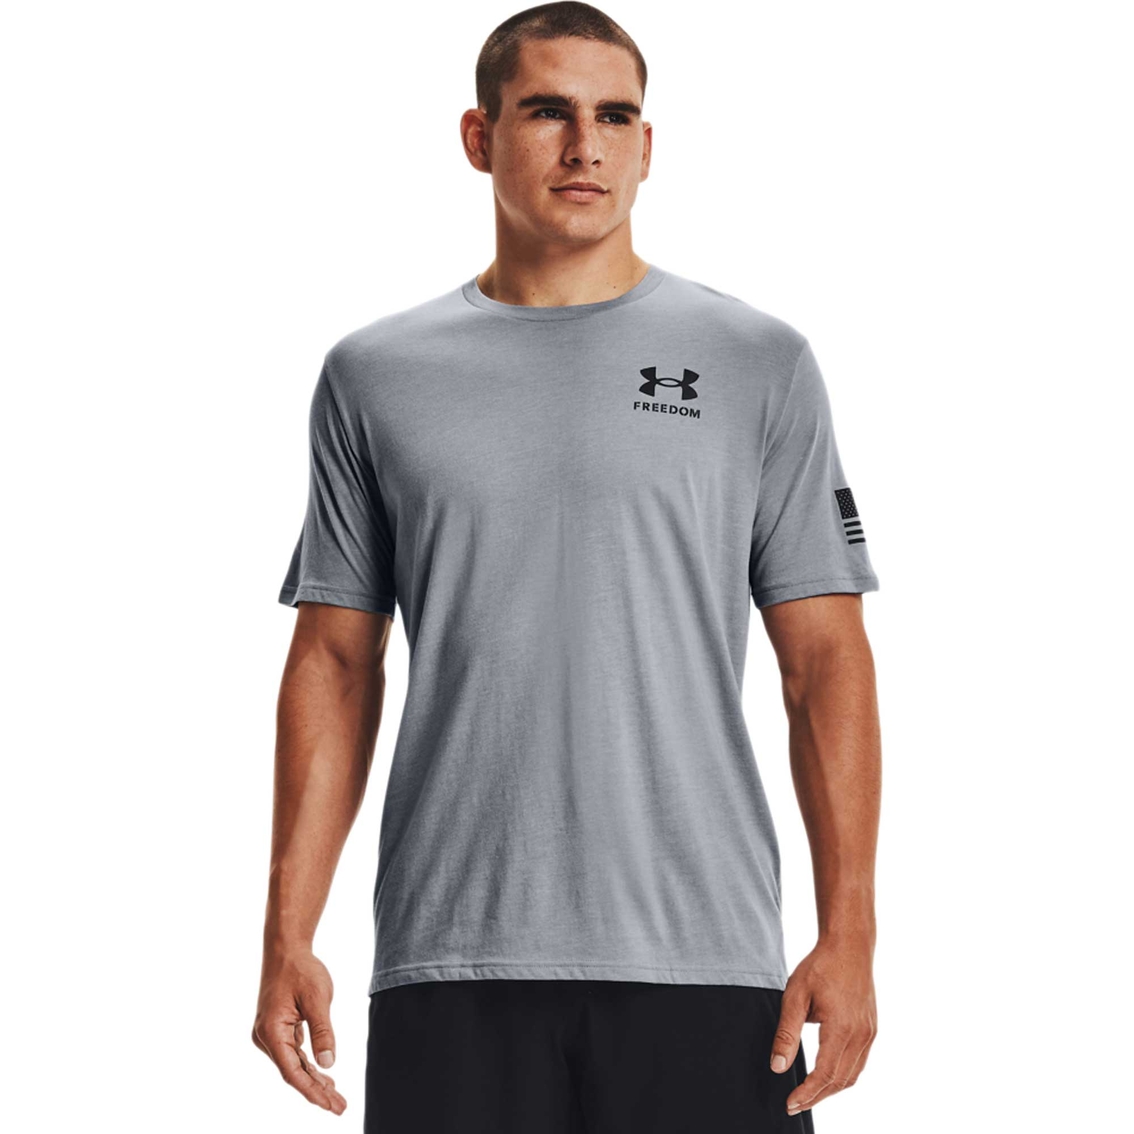 Under Armour New Freedom Flag Tee, Shirts, Clothing & Accessories